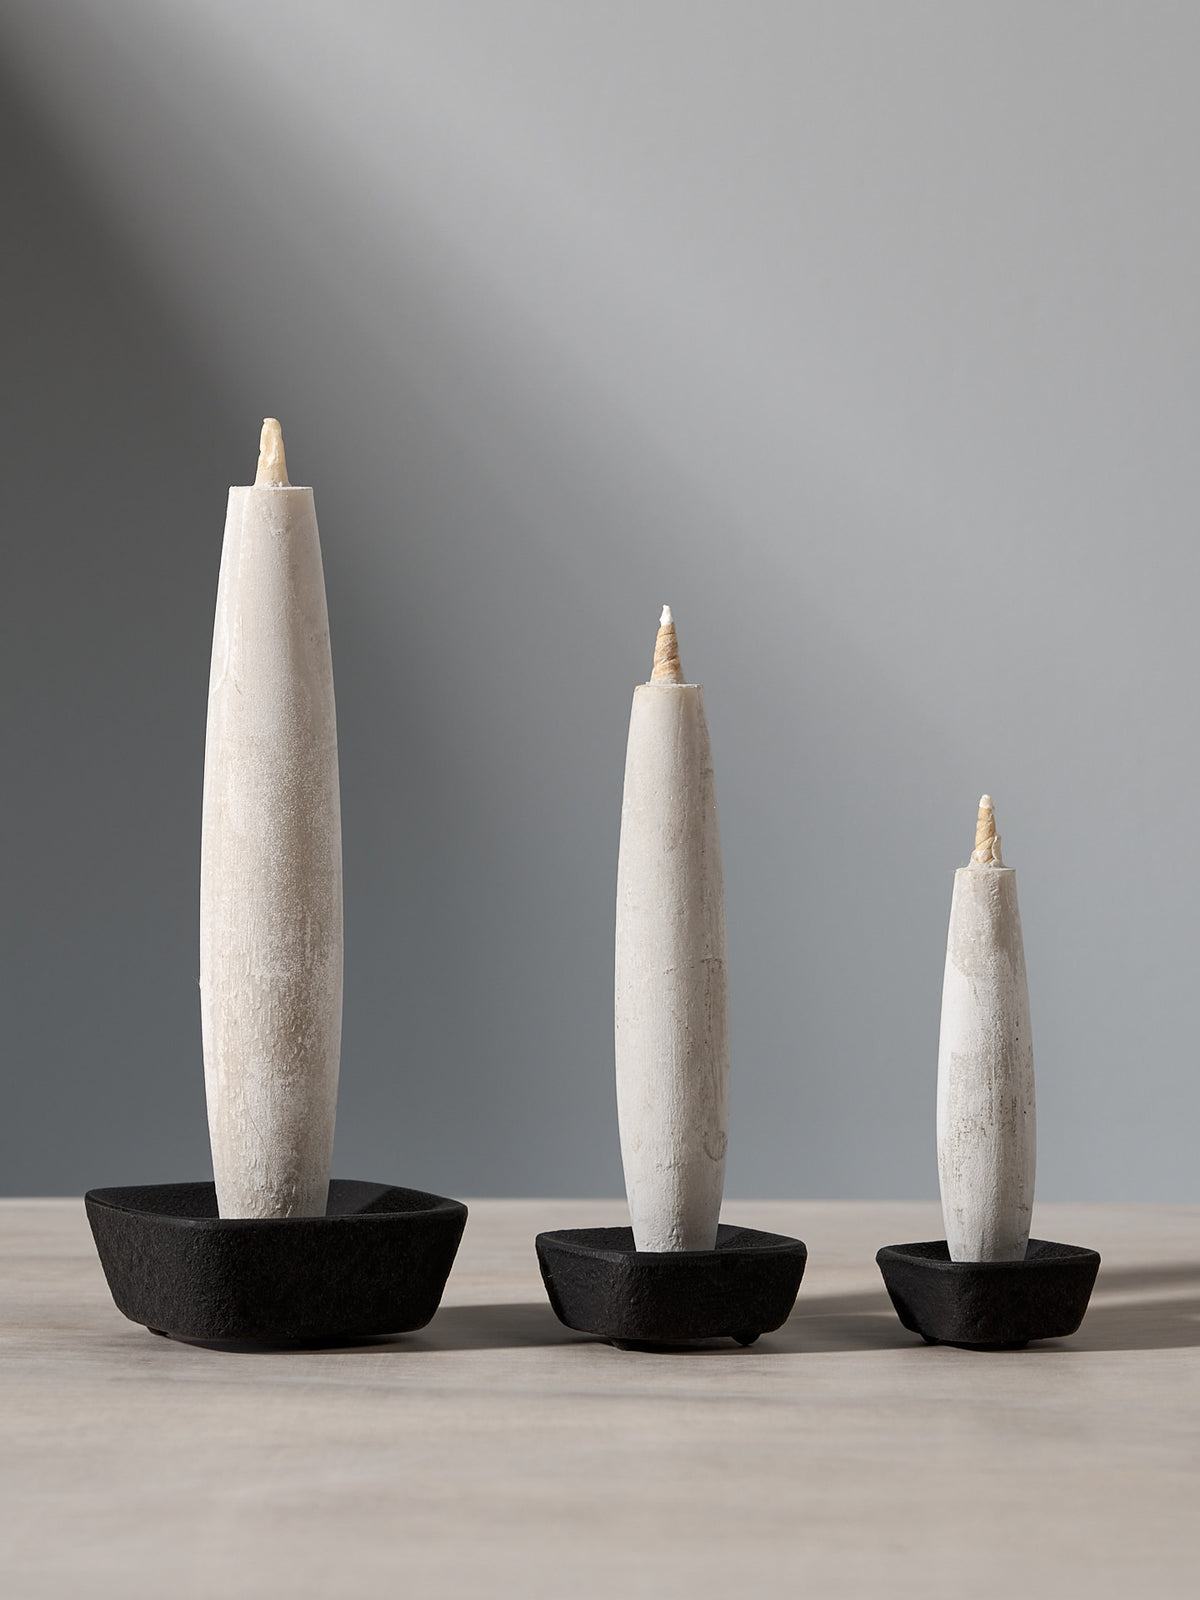 Three TOHAKU Candle – Large (box of 1) holders sitting on a table.